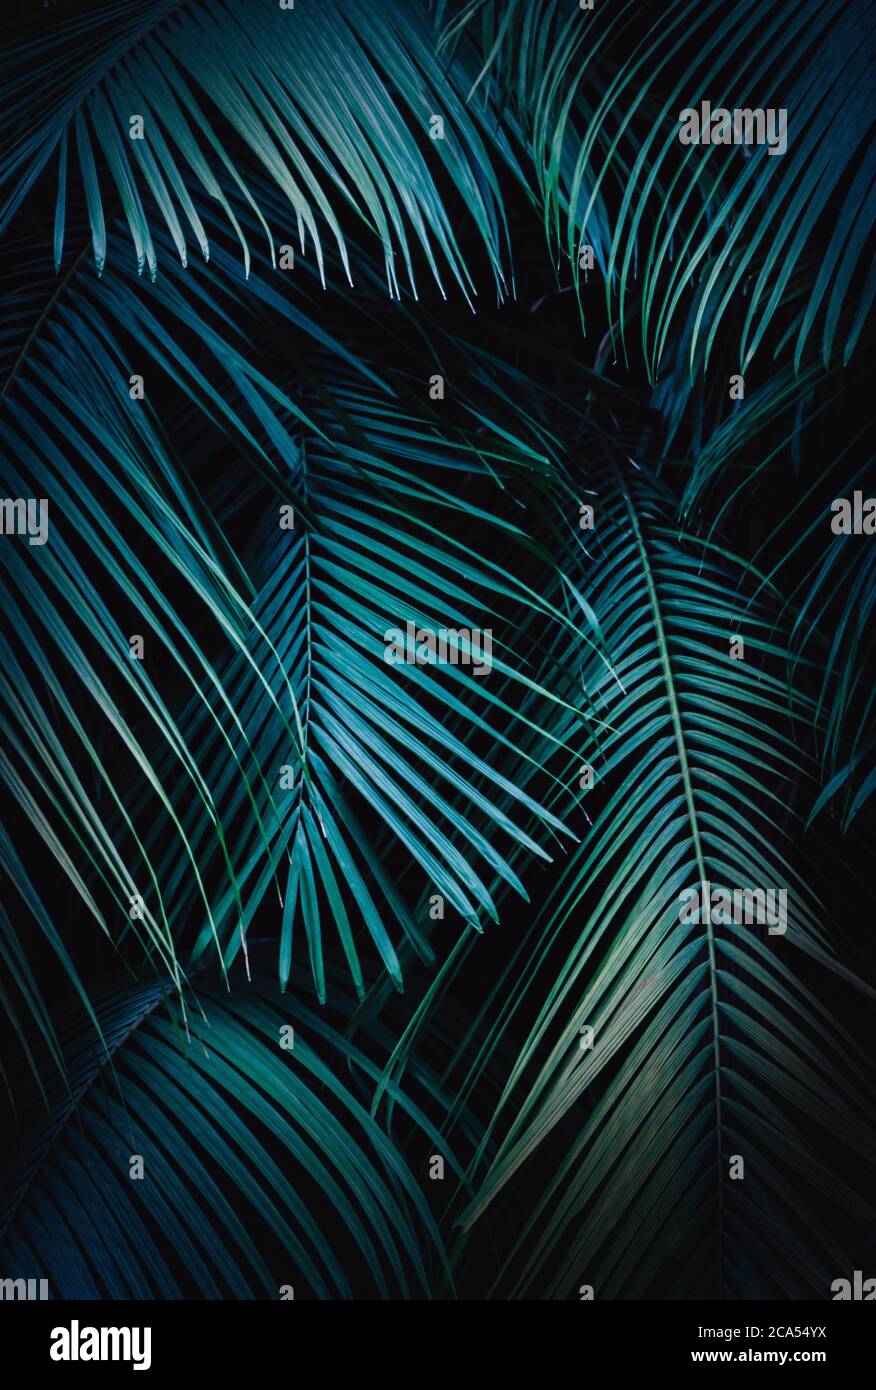 Tropical jungle background texture with palm tree leaves and a blue hue Stock Photo